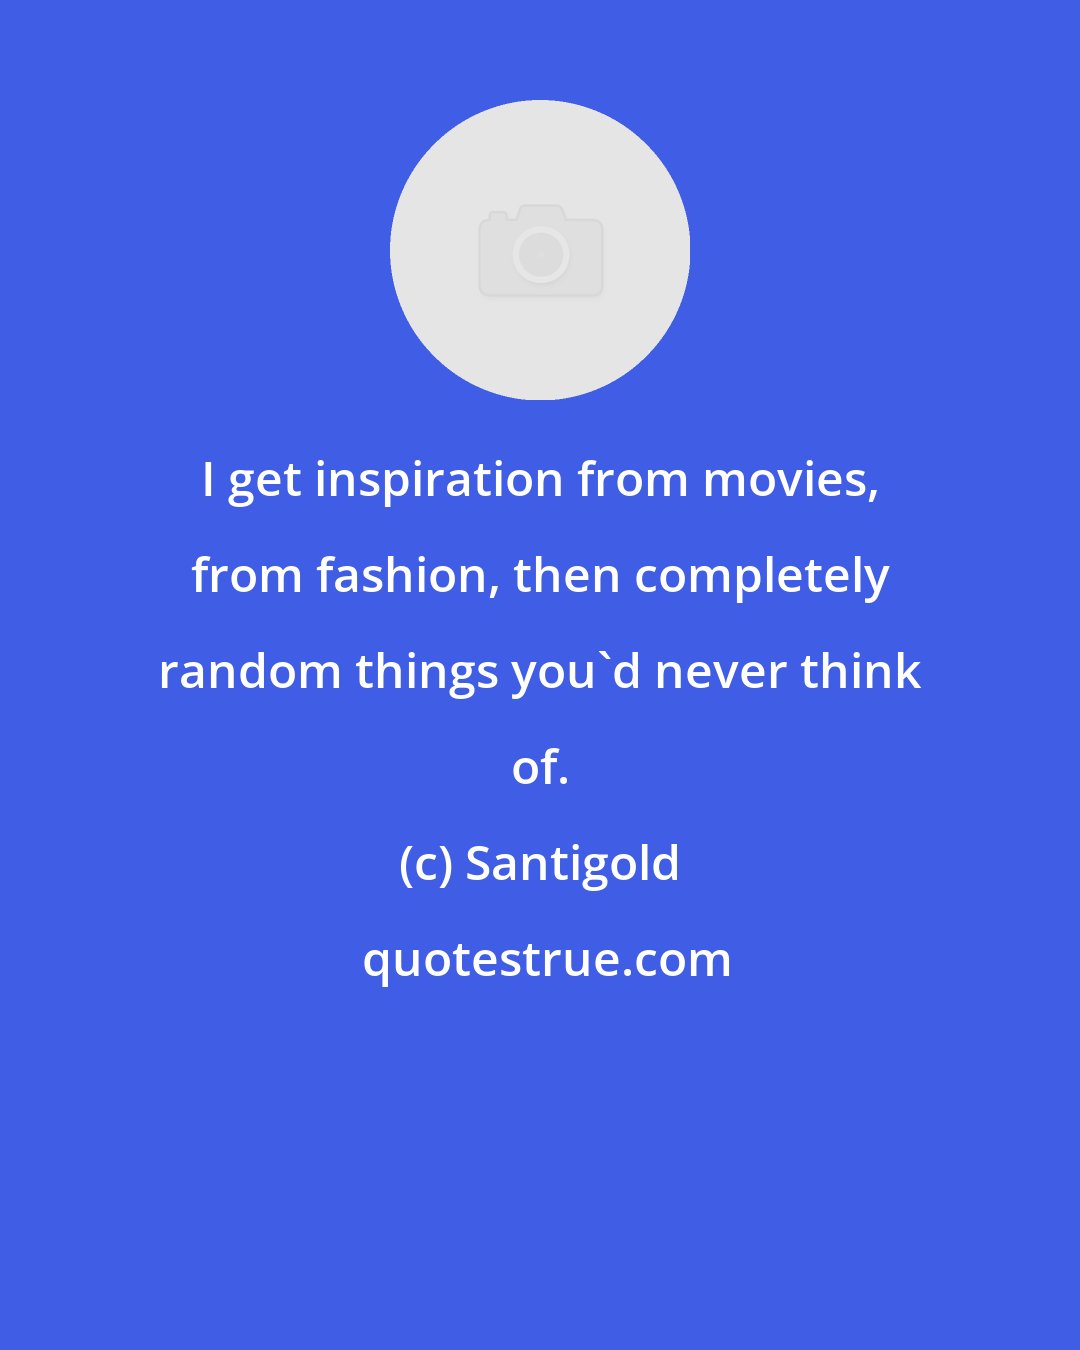 Santigold: I get inspiration from movies, from fashion, then completely random things you'd never think of.